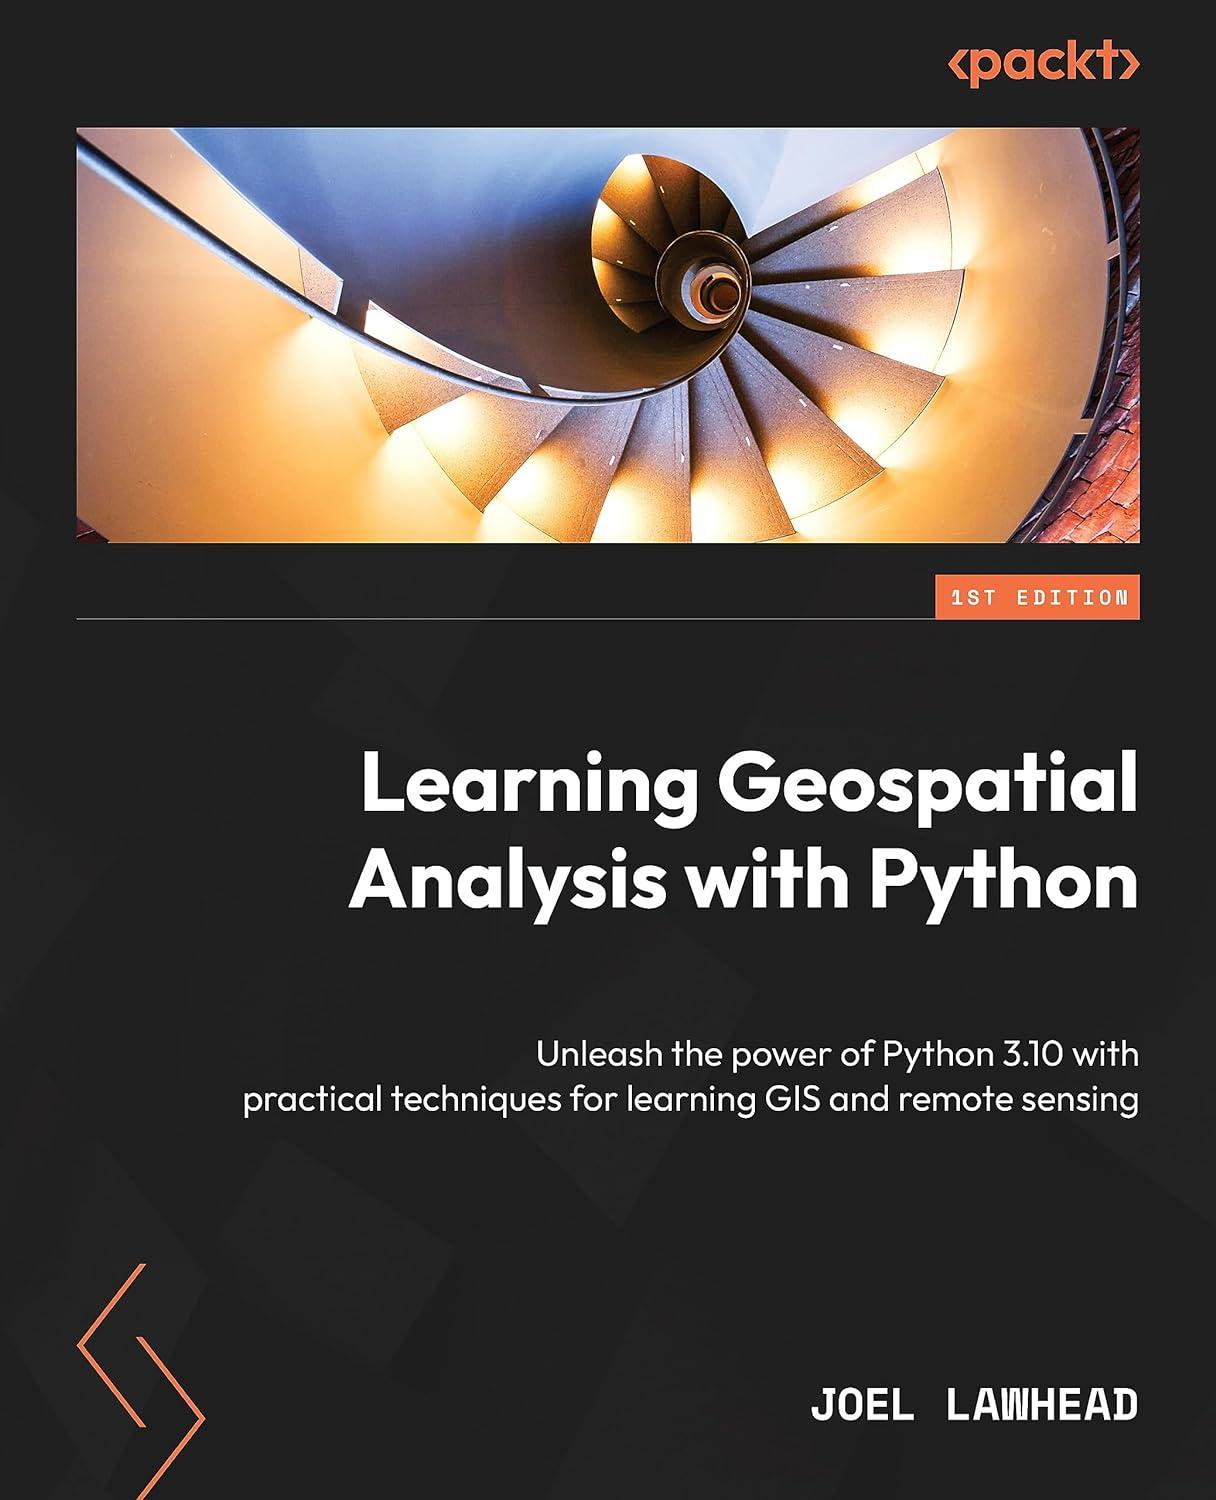 learning geospatial analysis with python unleash the power of python 3.10 with practical techniques for